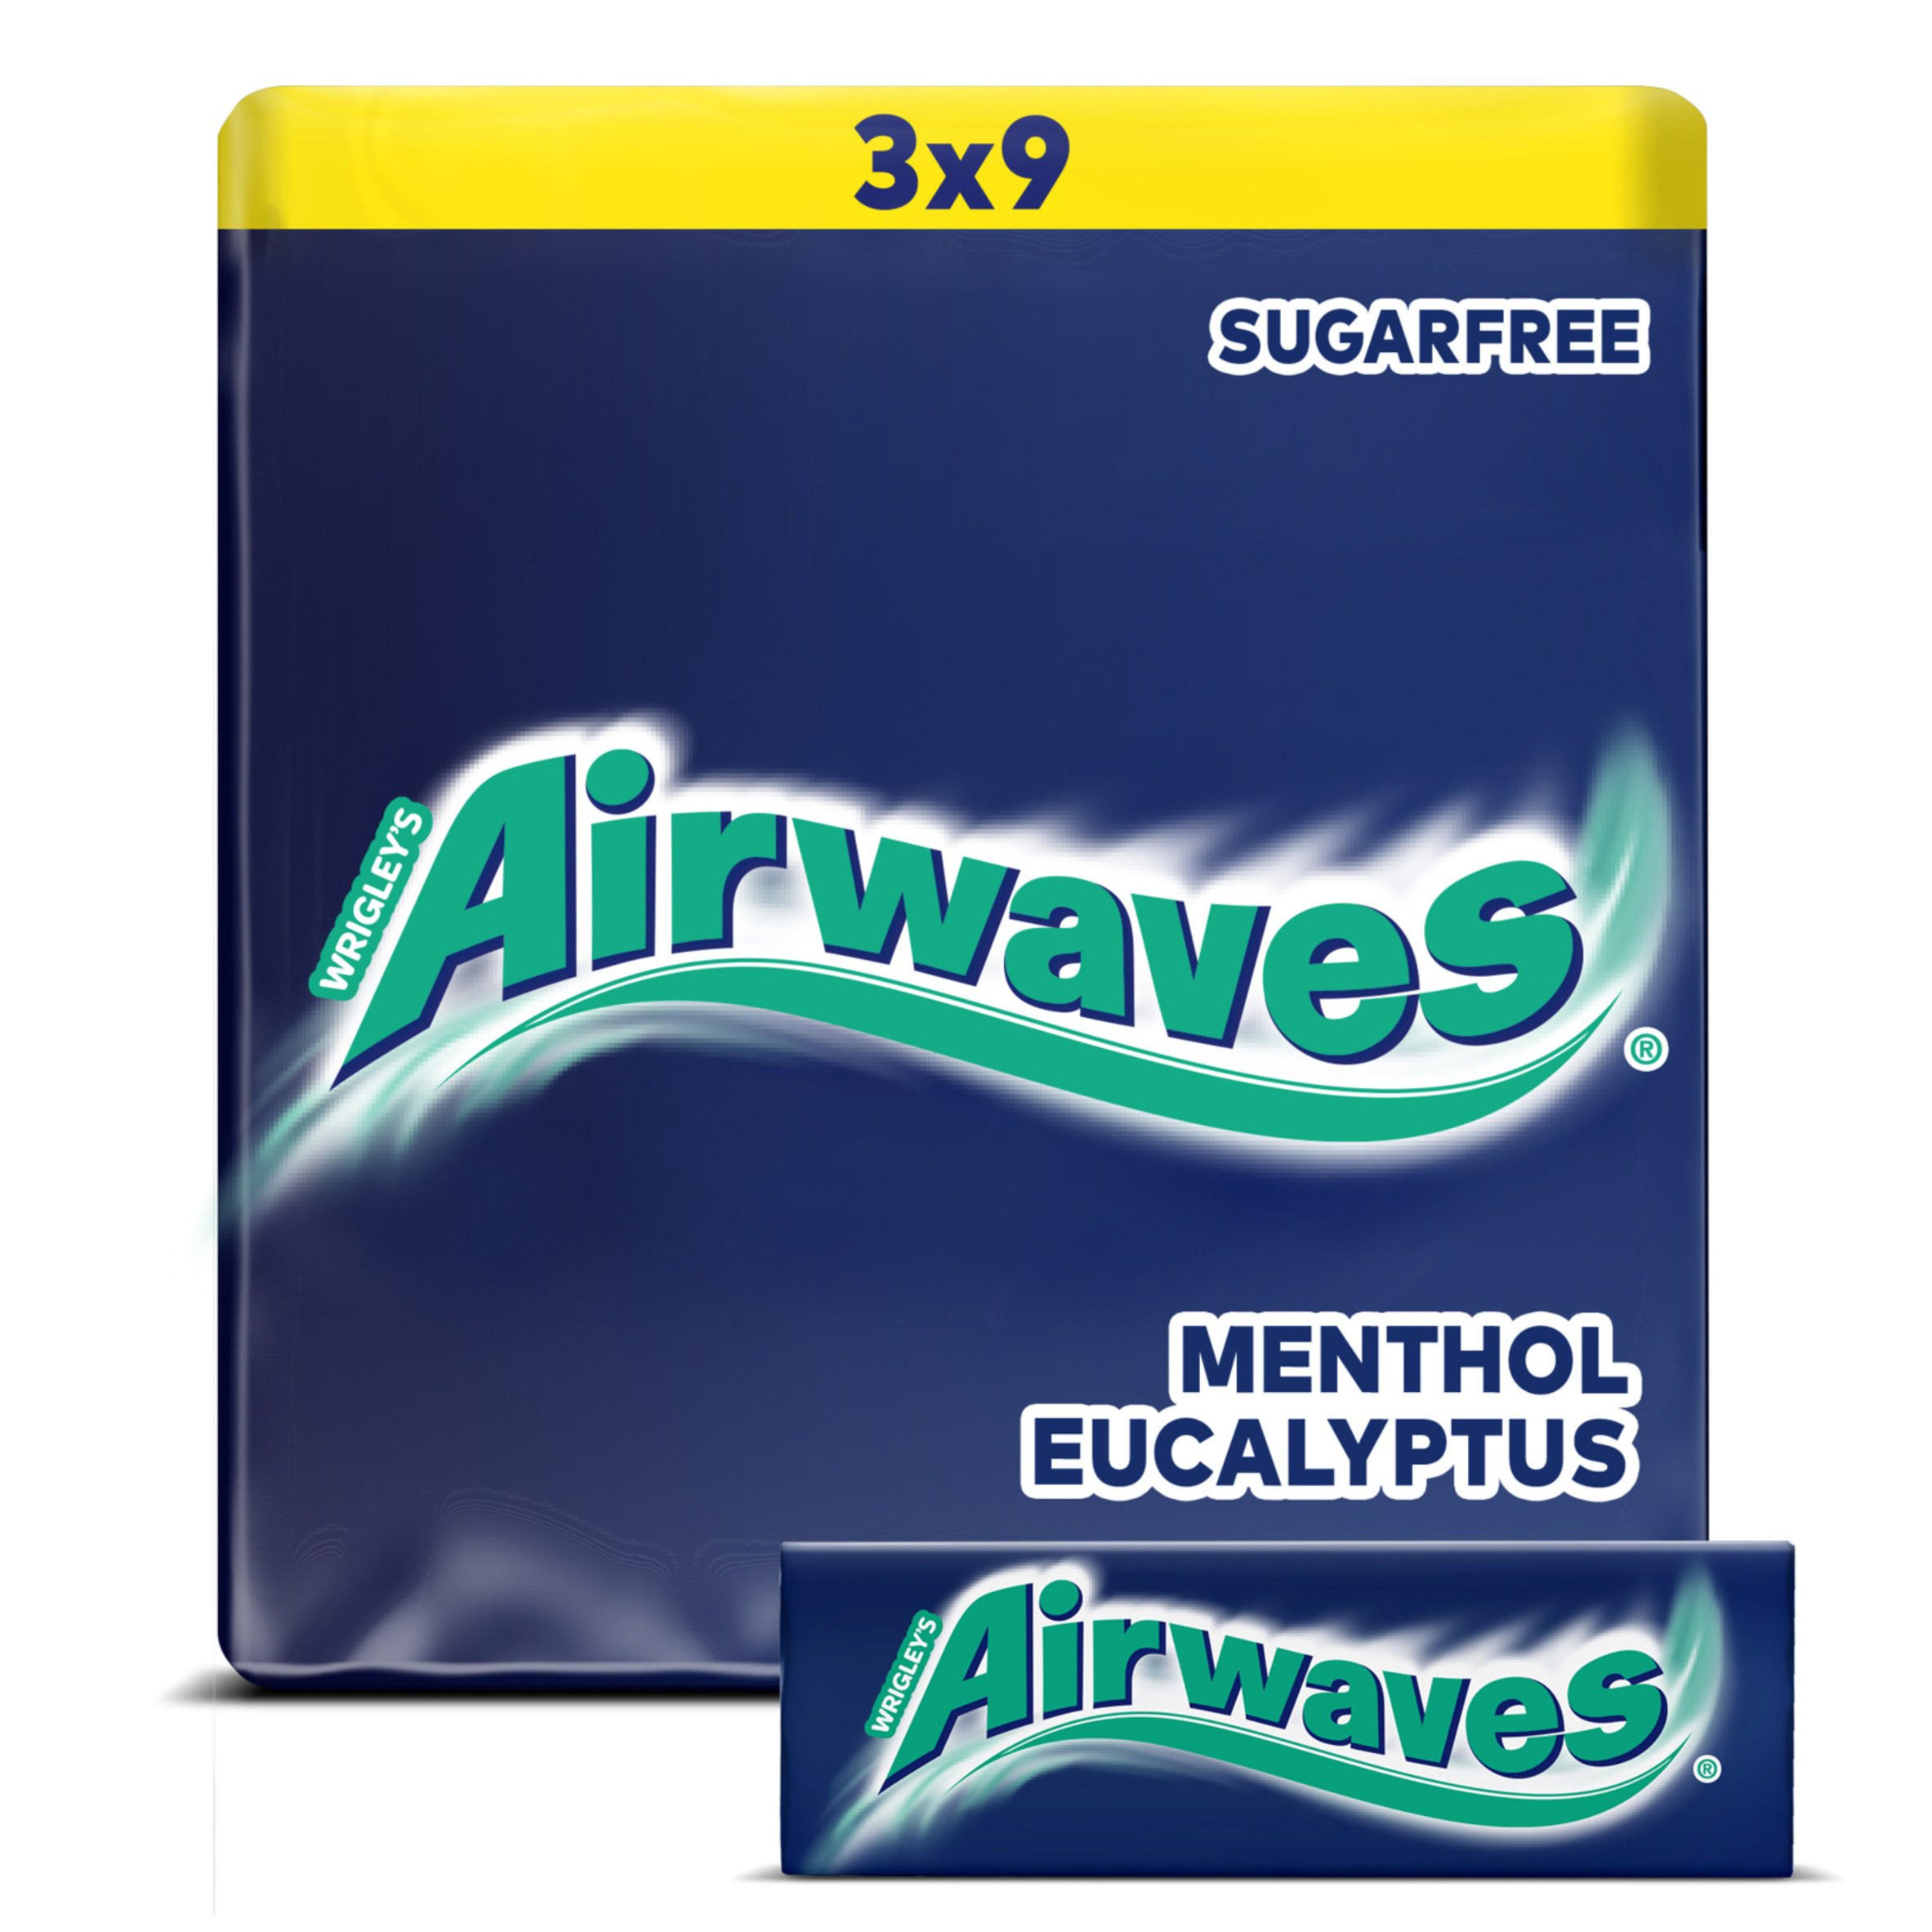 https://assets.iceland.co.uk/i/iceland/airwaves_menthol_eucalyptus_sugarfree_chewing_gum_multipack_3_x_9_pieces_75542_T1.jpg?$pdpzoom$